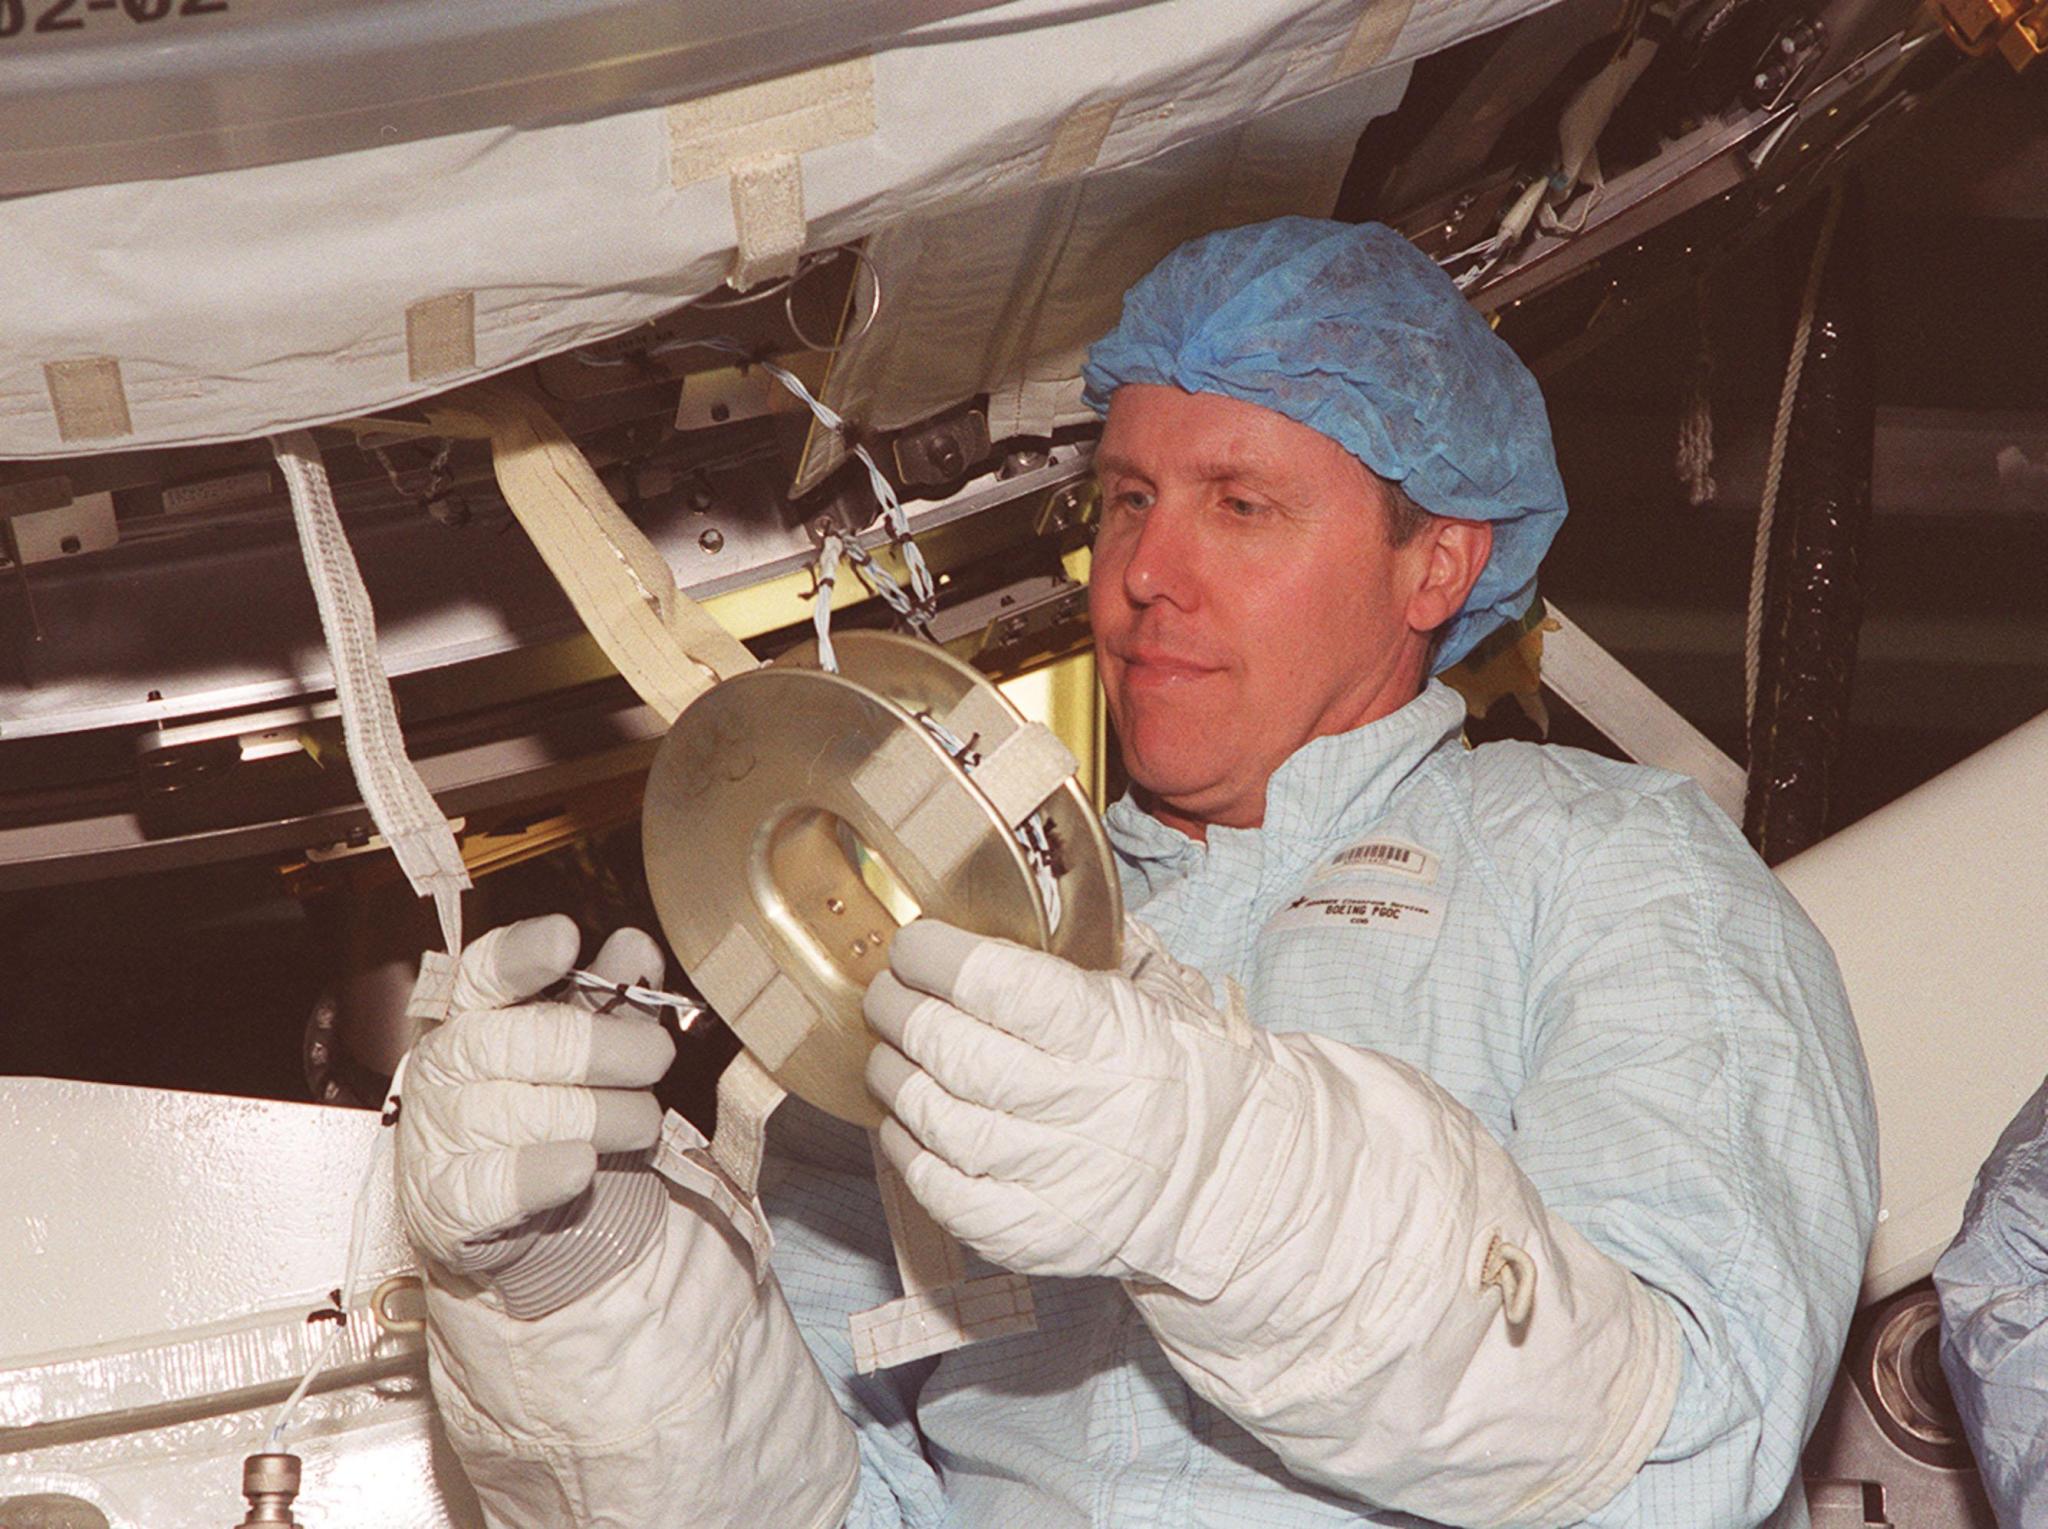 STS-98 Mission Specialist Tom Jones takes part in Crew Equipment Interface Test activities at NASA's Kennedy Space Center. 